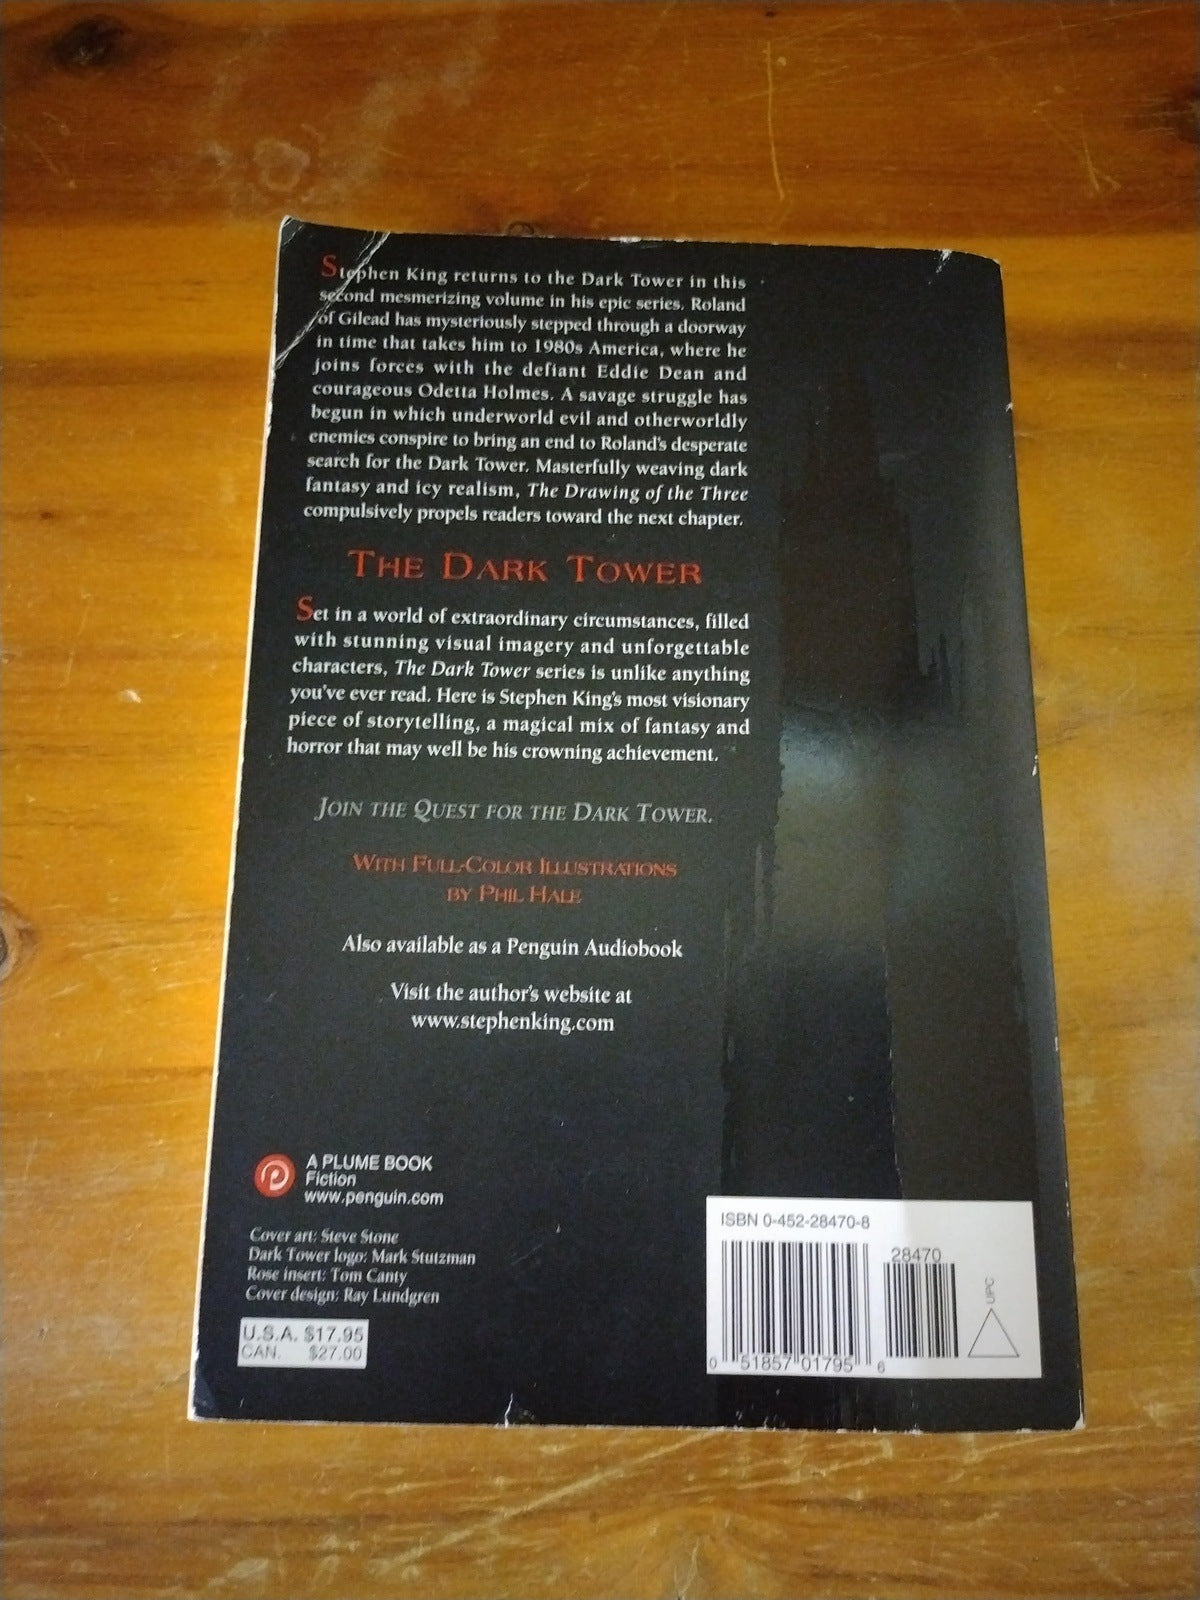 Stephen King The Drawing of the Three Paperback